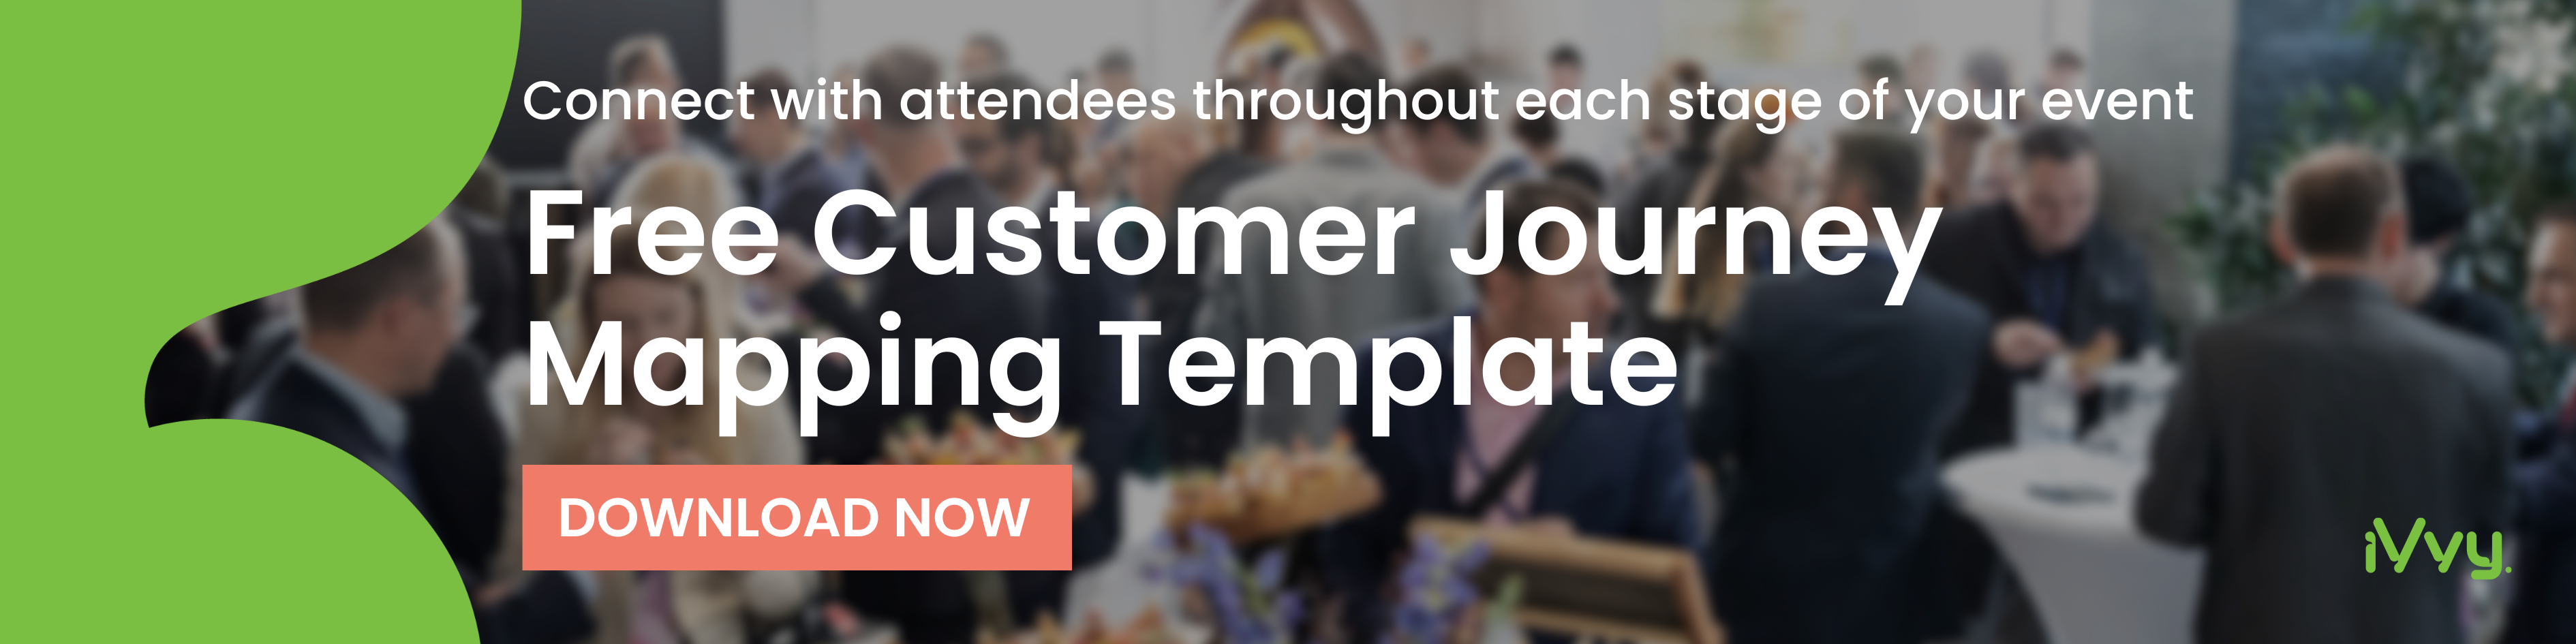 event customer journey mapping template banner